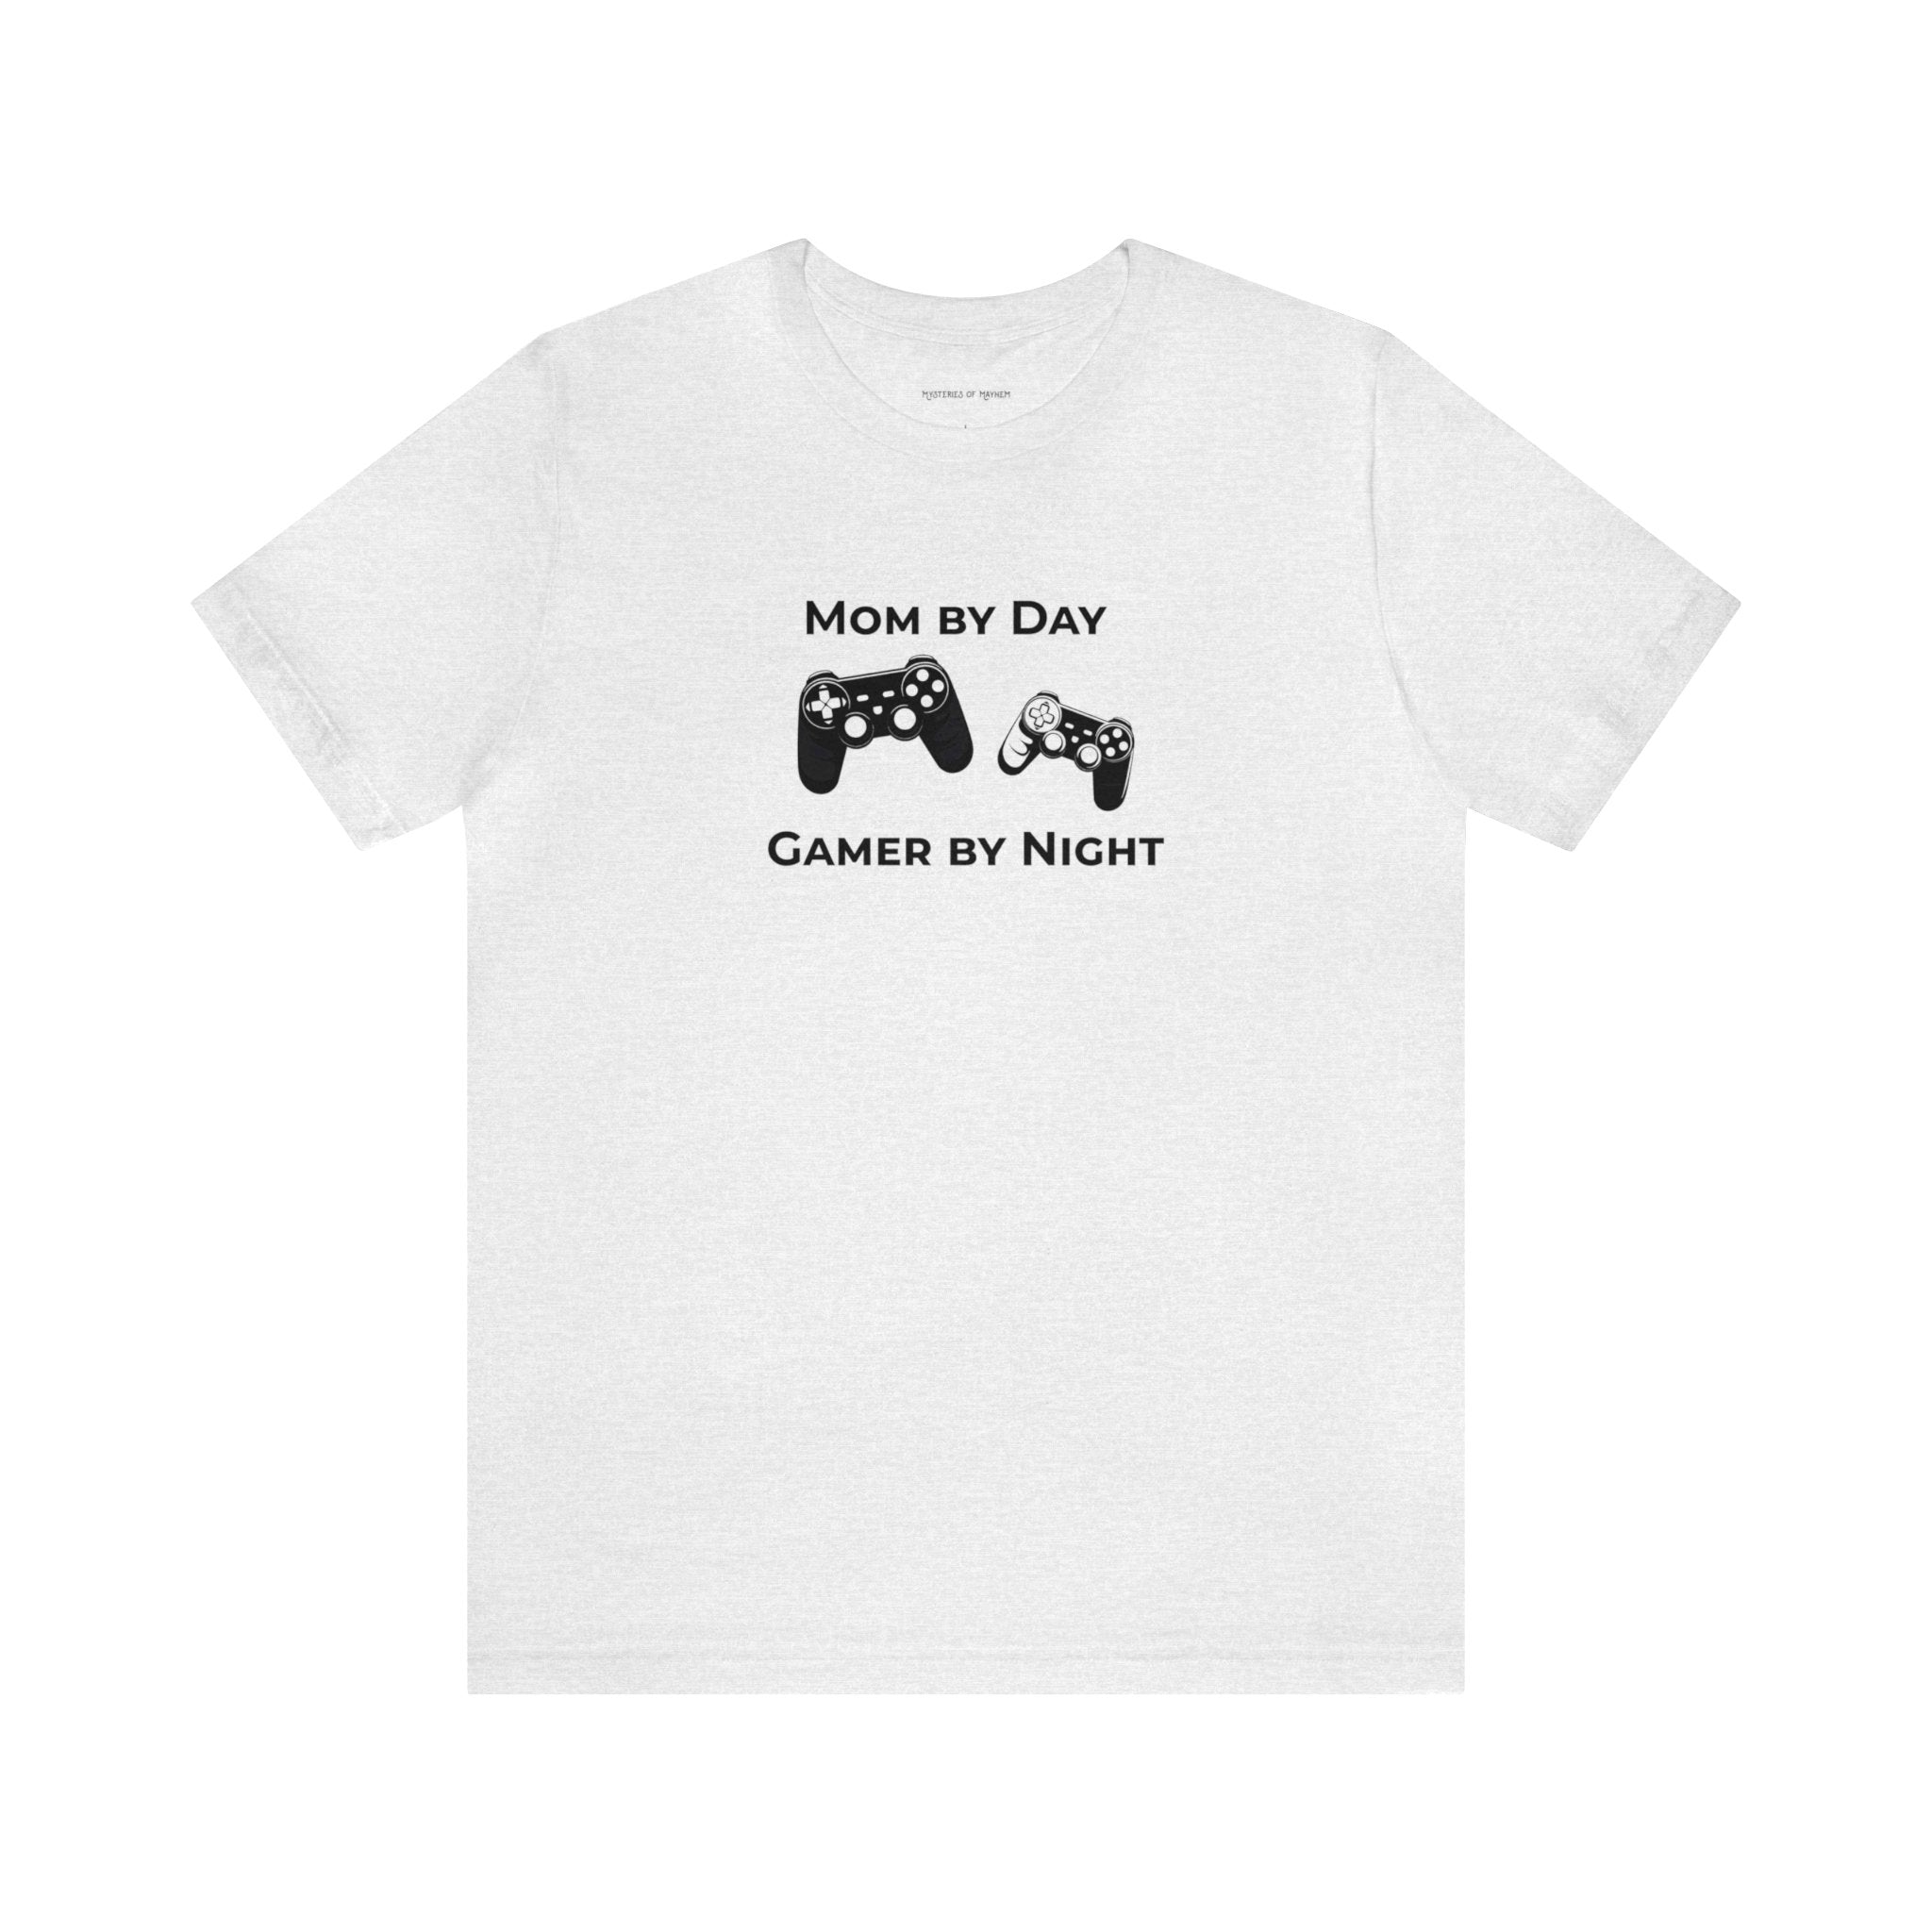 Mom by Day Gamer by Night T-Shirt | Gift for Gamers, Gamer Shirt, Nerdy Gifts, Gift for Mom